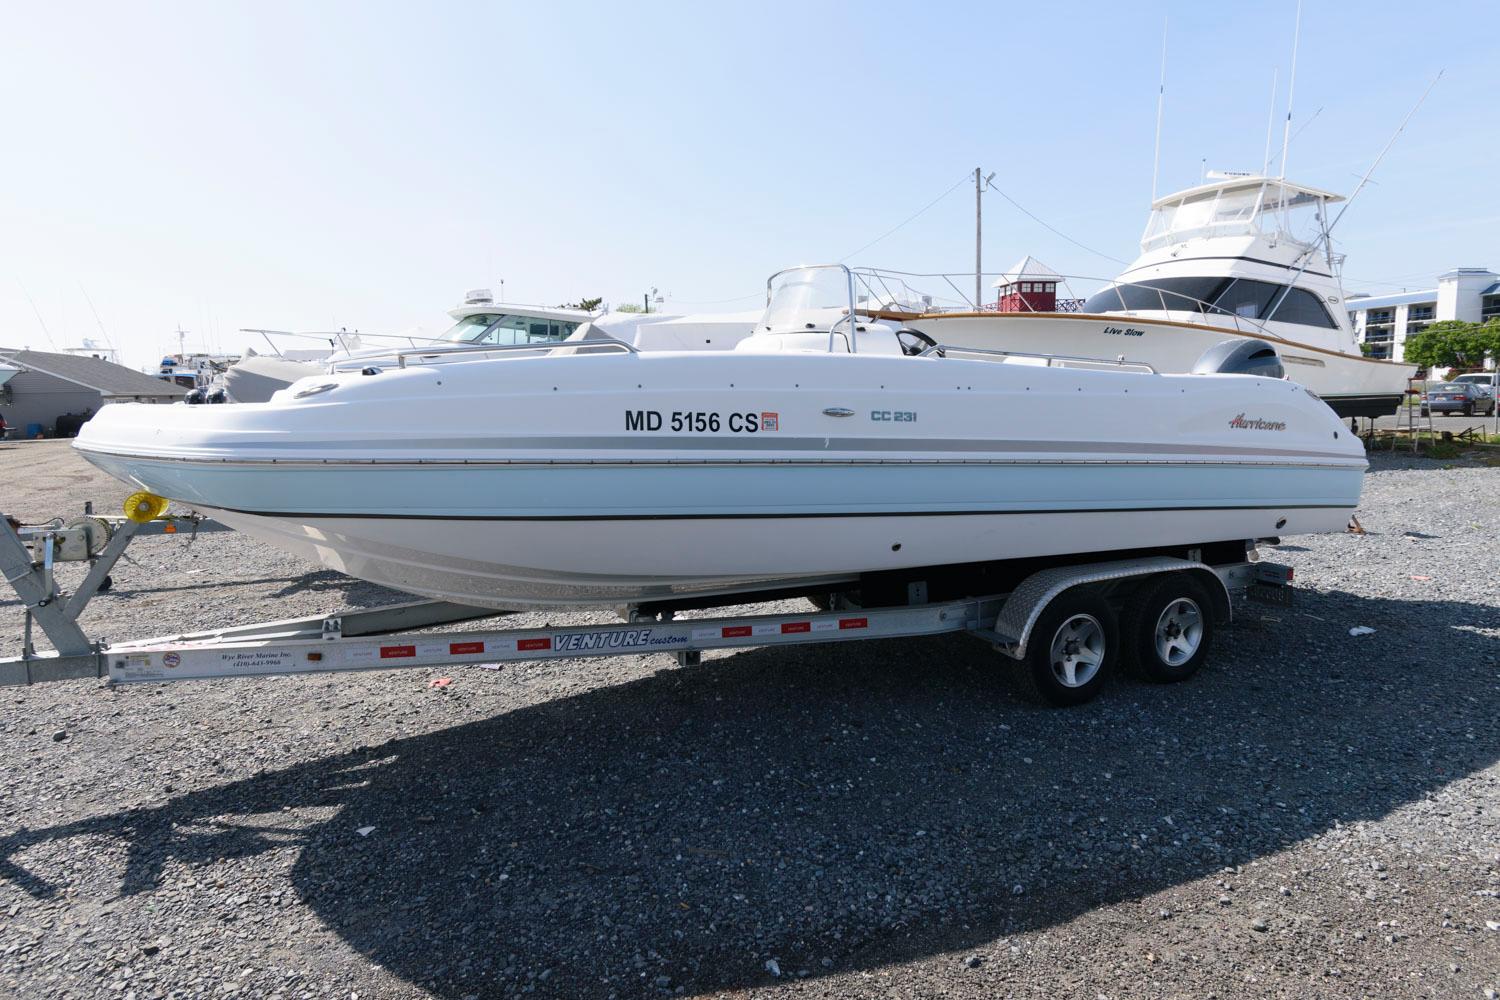 M 6889 MD Knot 10 Yacht Sales